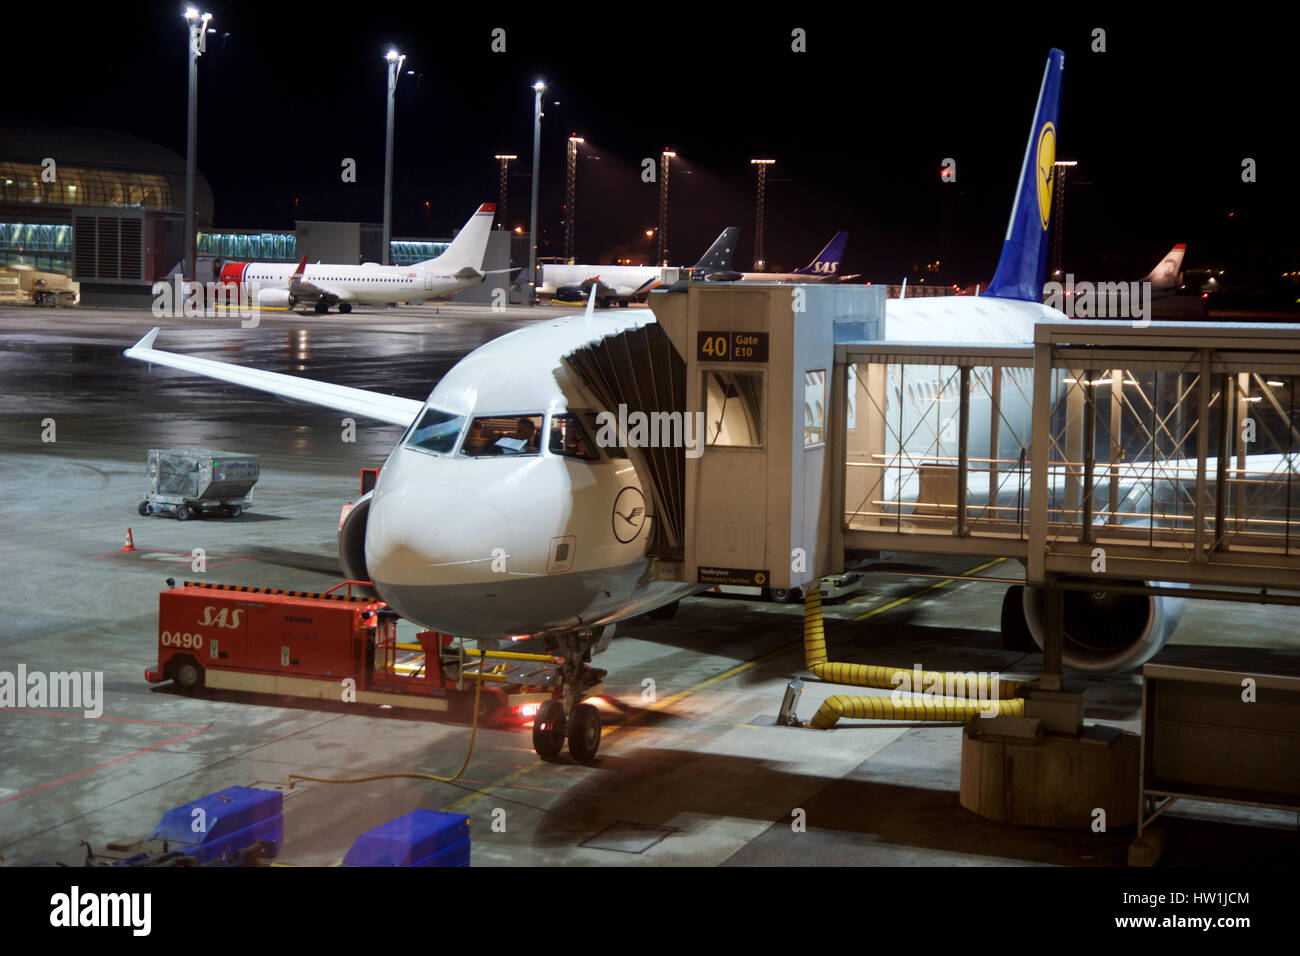 OSLO, NORWAY - JAN 21st, 2017: Lufthansa Airbus A320 airplane at the gate ready for boarding, early in the morning during winter. Stock Photo